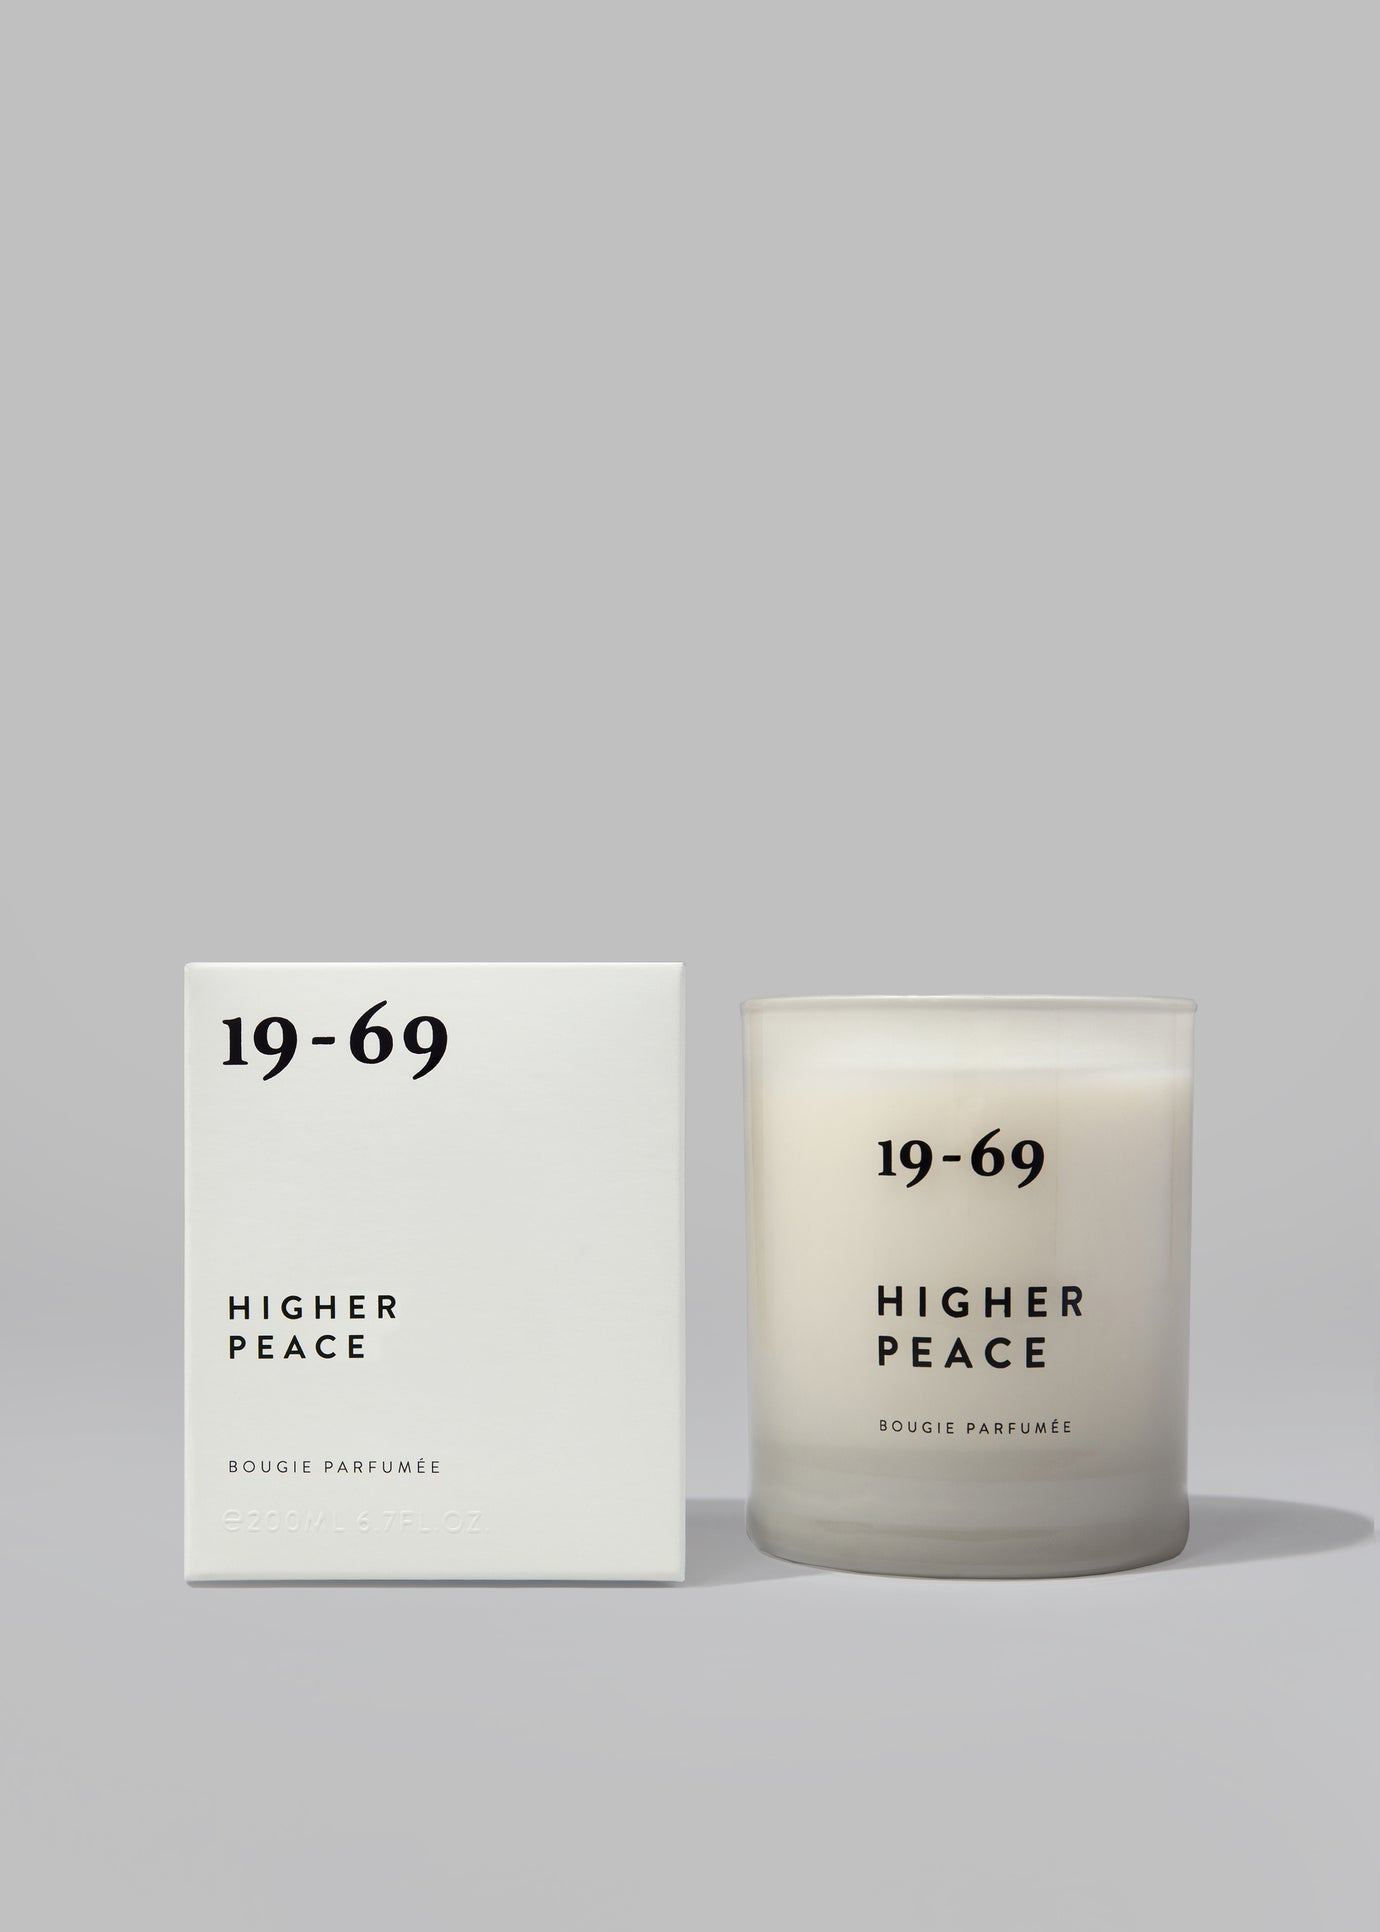 19-69 Higher Peace Candle - 1